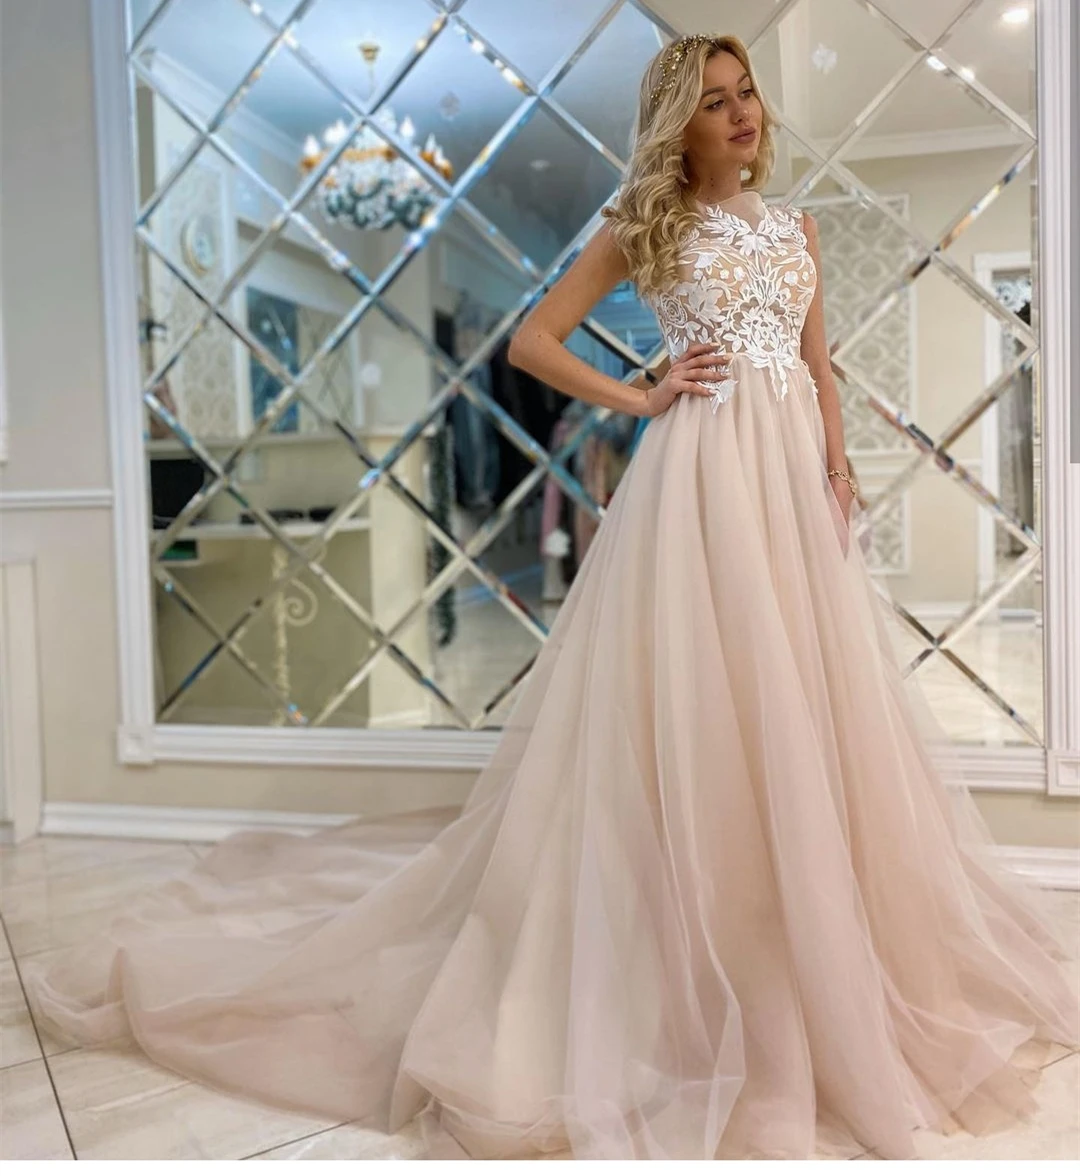 

2021 WeddinG Dress Light Champagne Color Sweep Train Sleeveless Lace Appliques O-Neck Charming For Women Brides Lady Princes